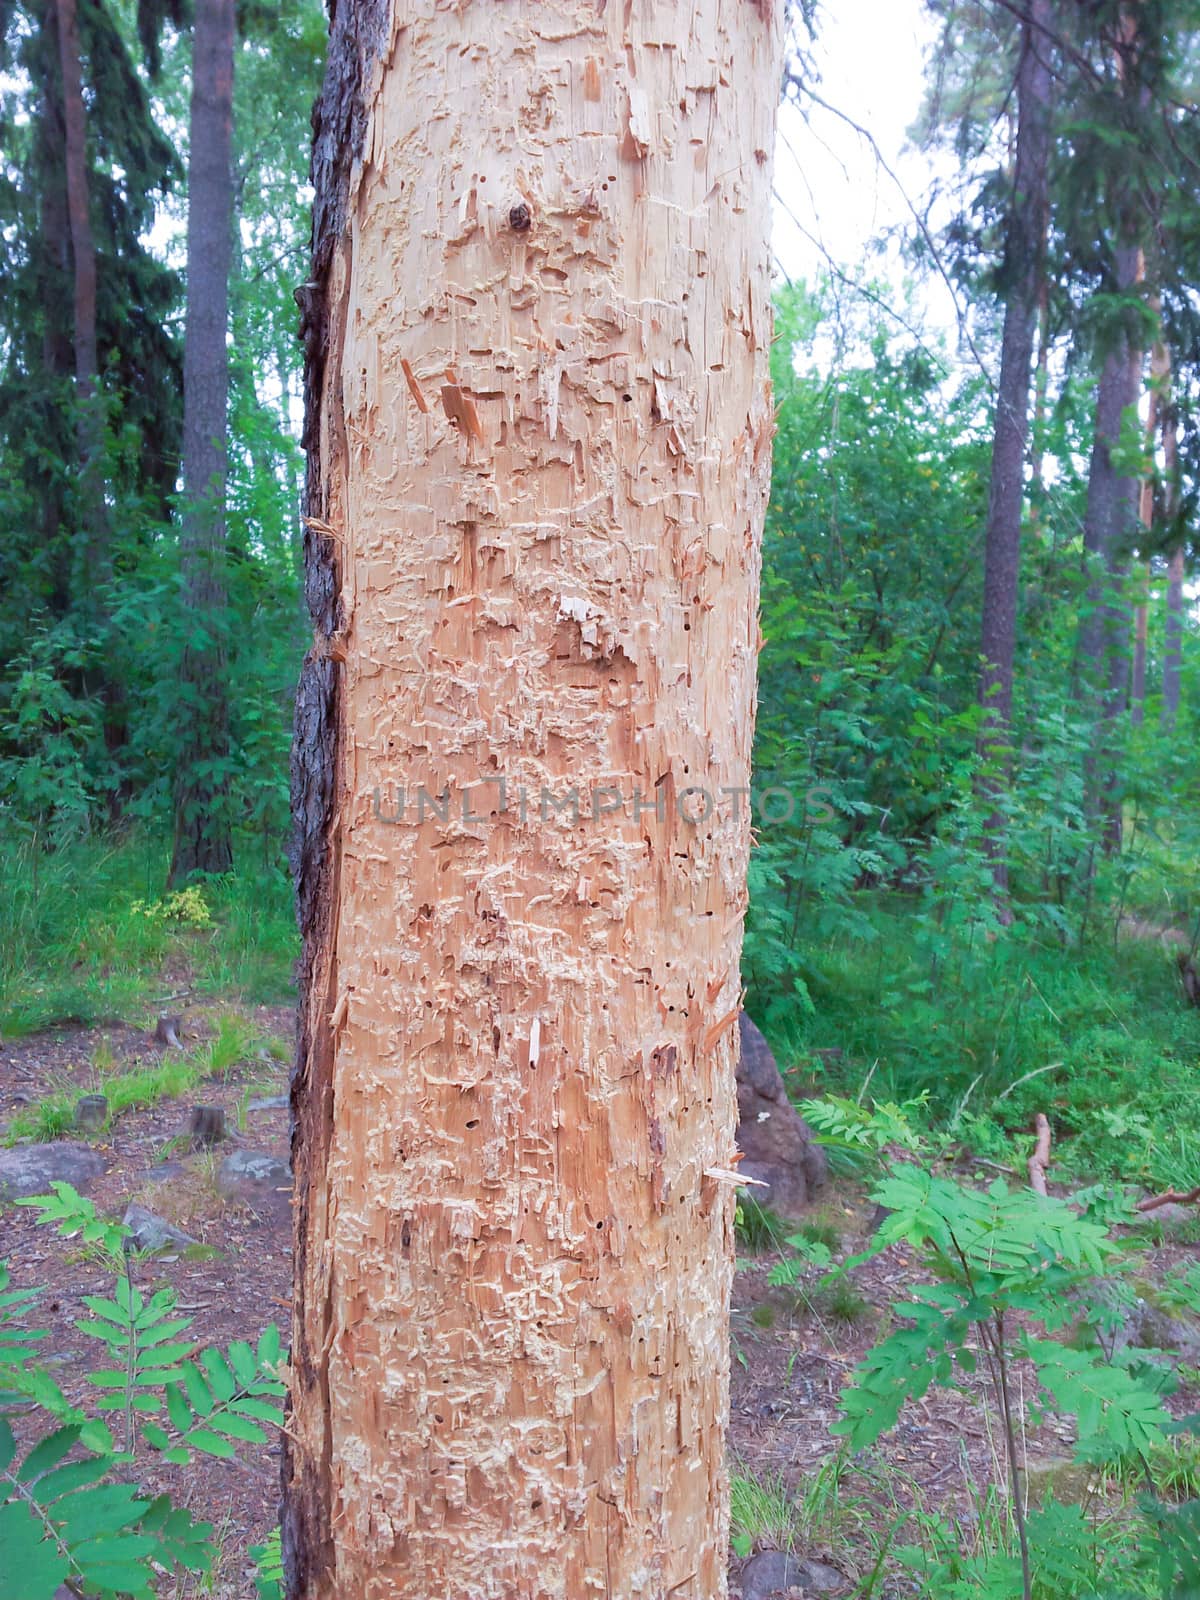 Pine tree eaten by termites, standing in a green forest